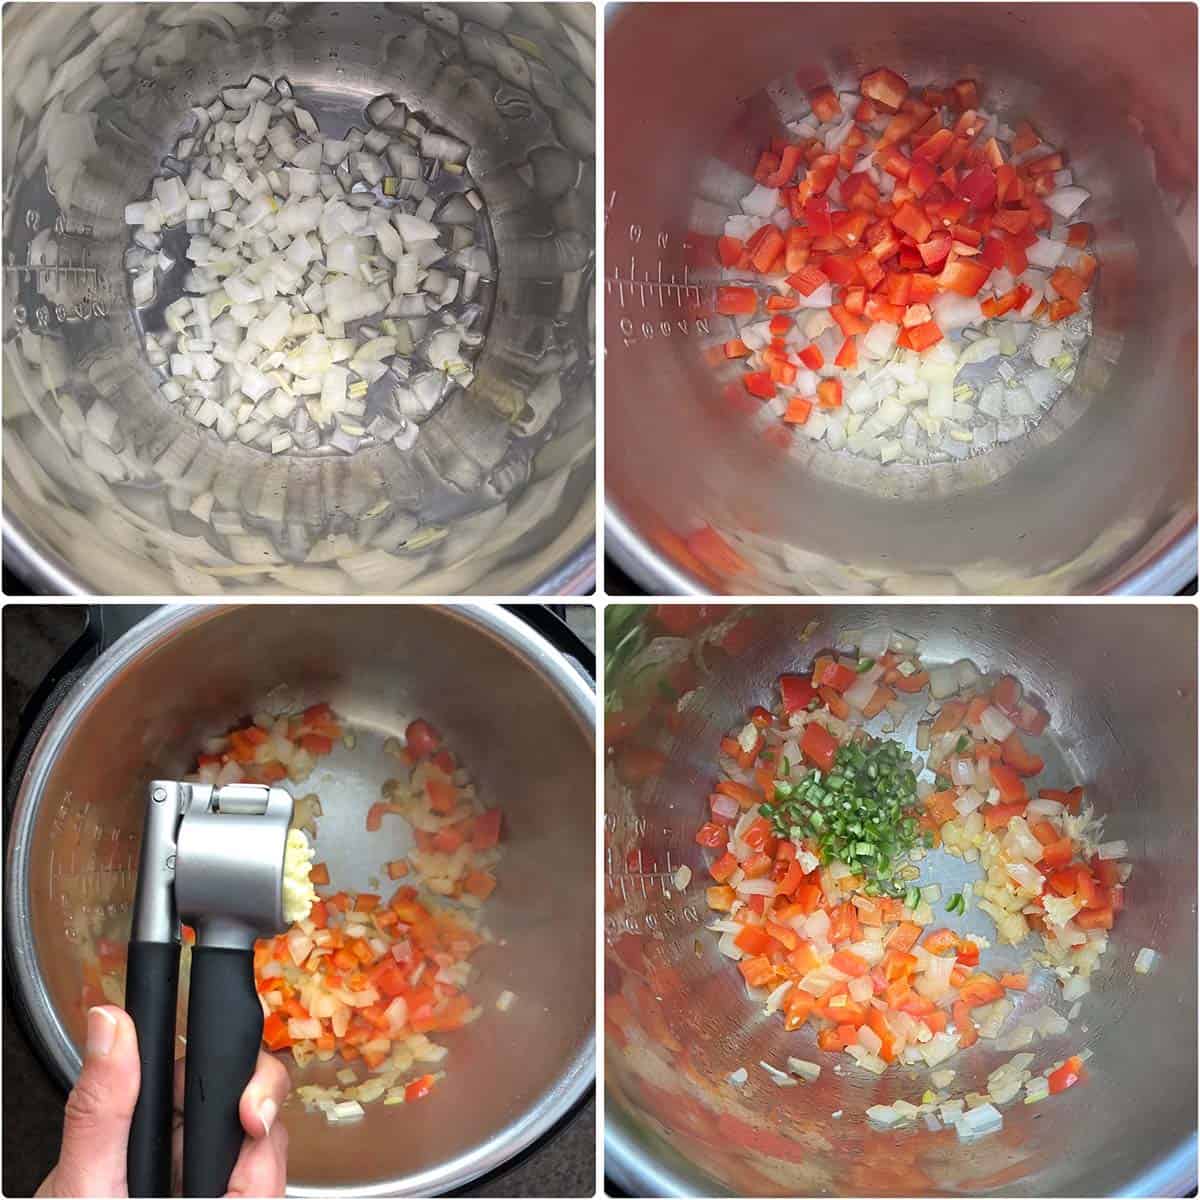 4 panel photo showing the sautéing of veggies in an Instant Pot.